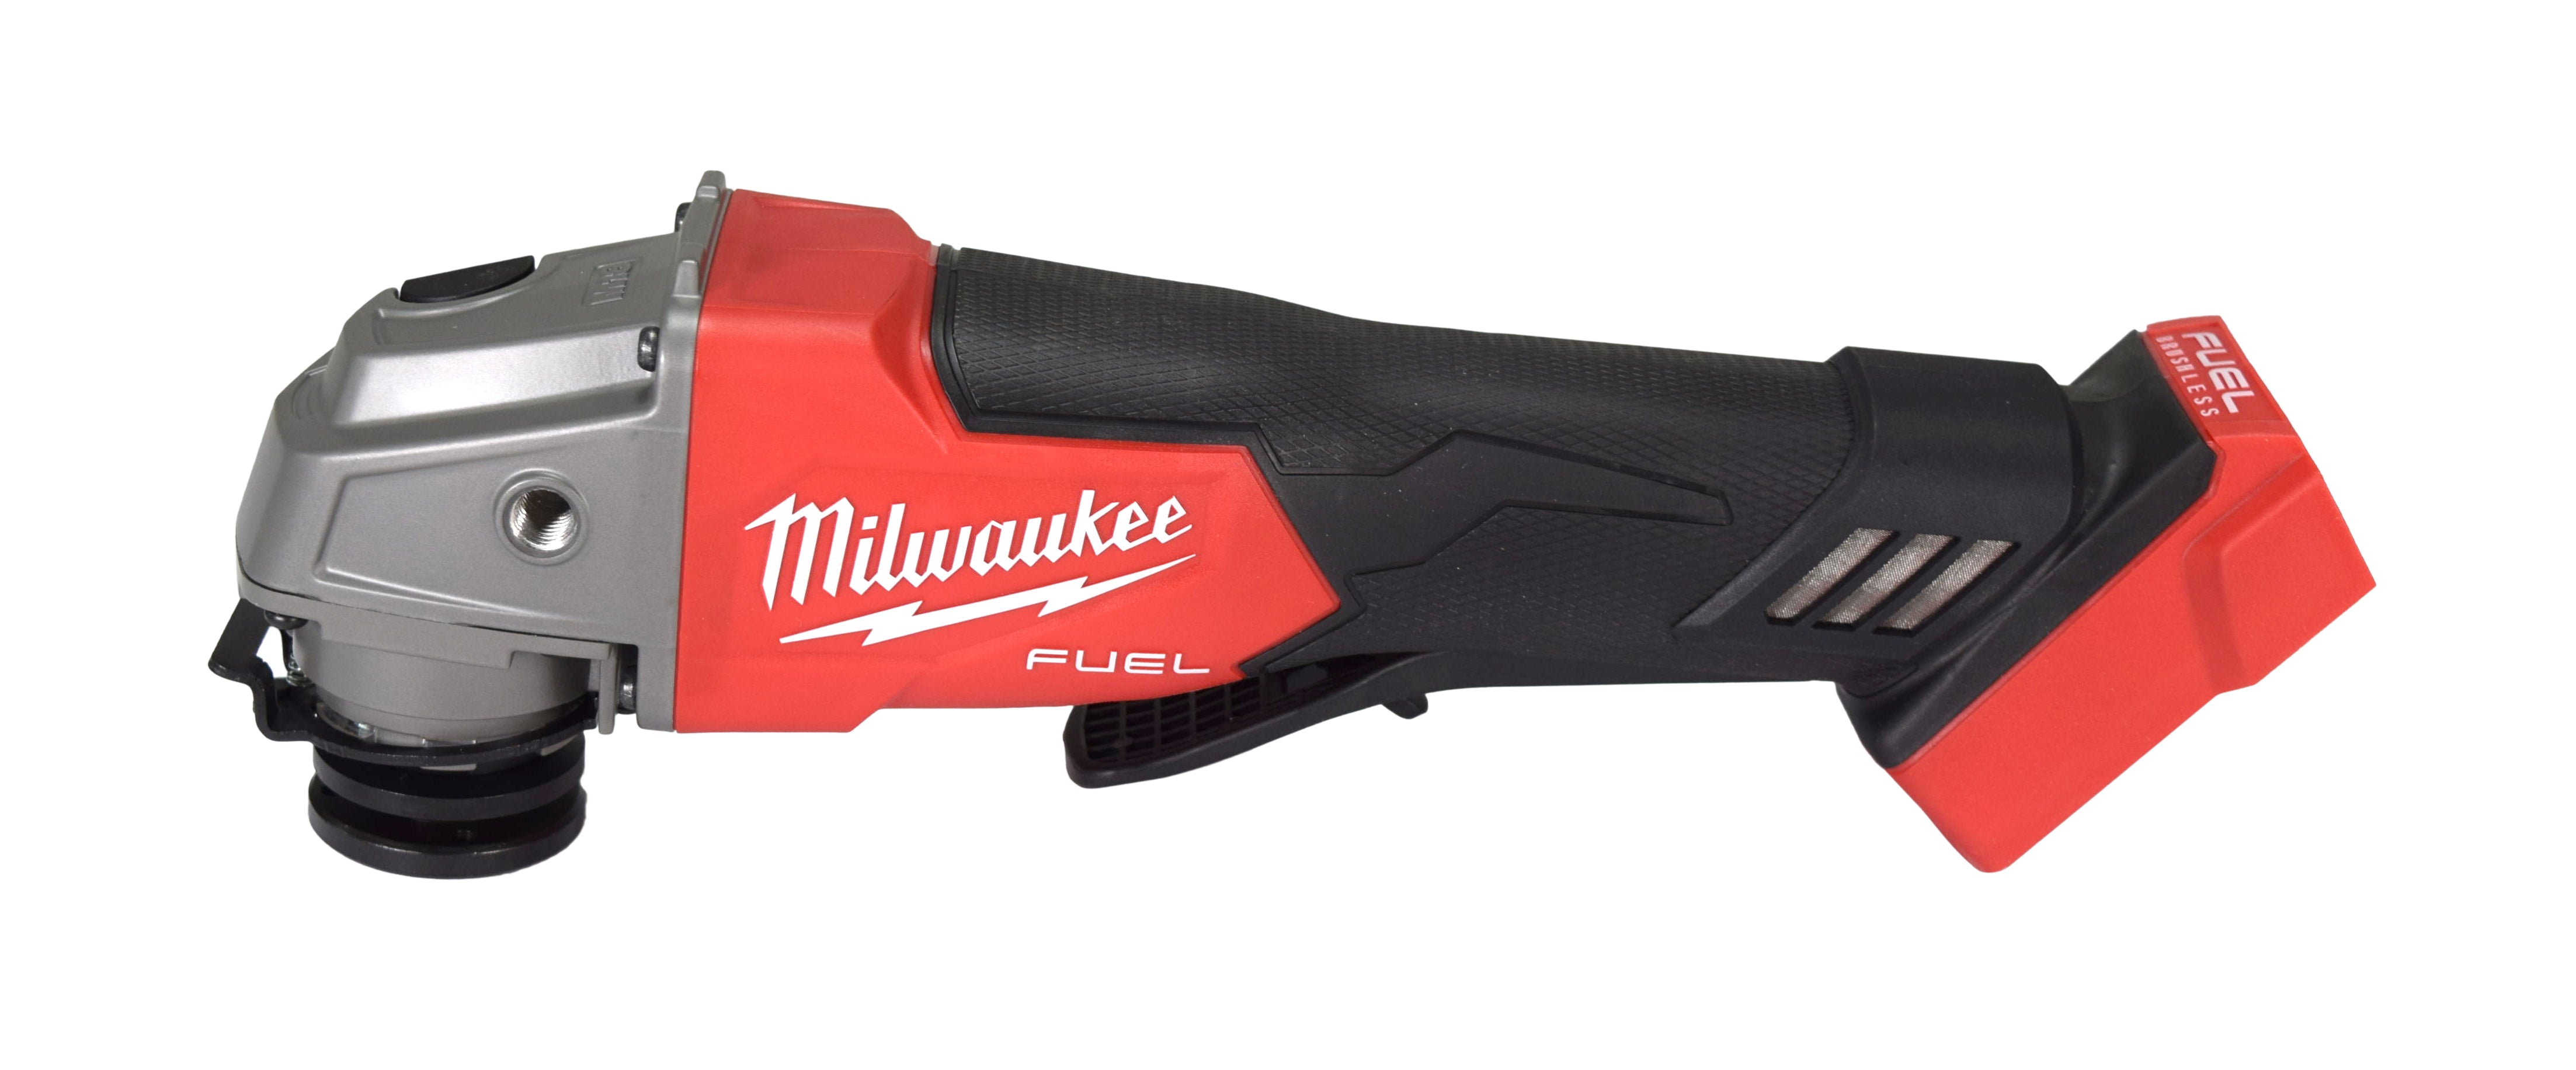 Milwaukee-2880-20-M18-FUEL-4-1-2-5-Grinder-Paddle-Switch-No-Lock-No-Charger-No-Battery-Bare-Tool-Only-image-2